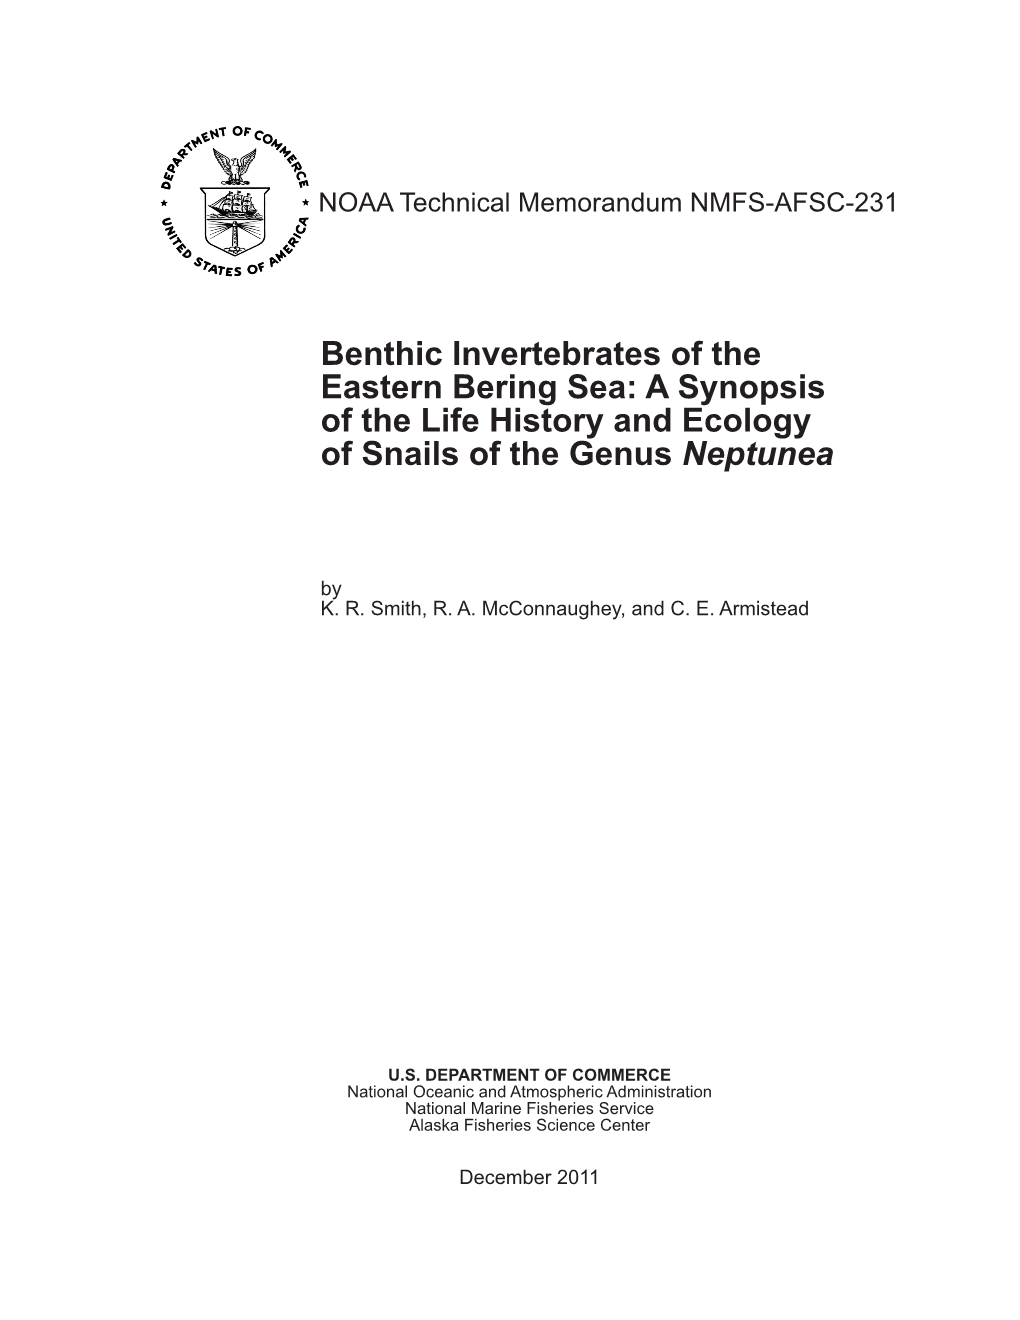 Benthic Invertebrates of the Eastern Bering Sea: a Synopsis of the Life History and Ecology of Snails of the Genus Neptunea